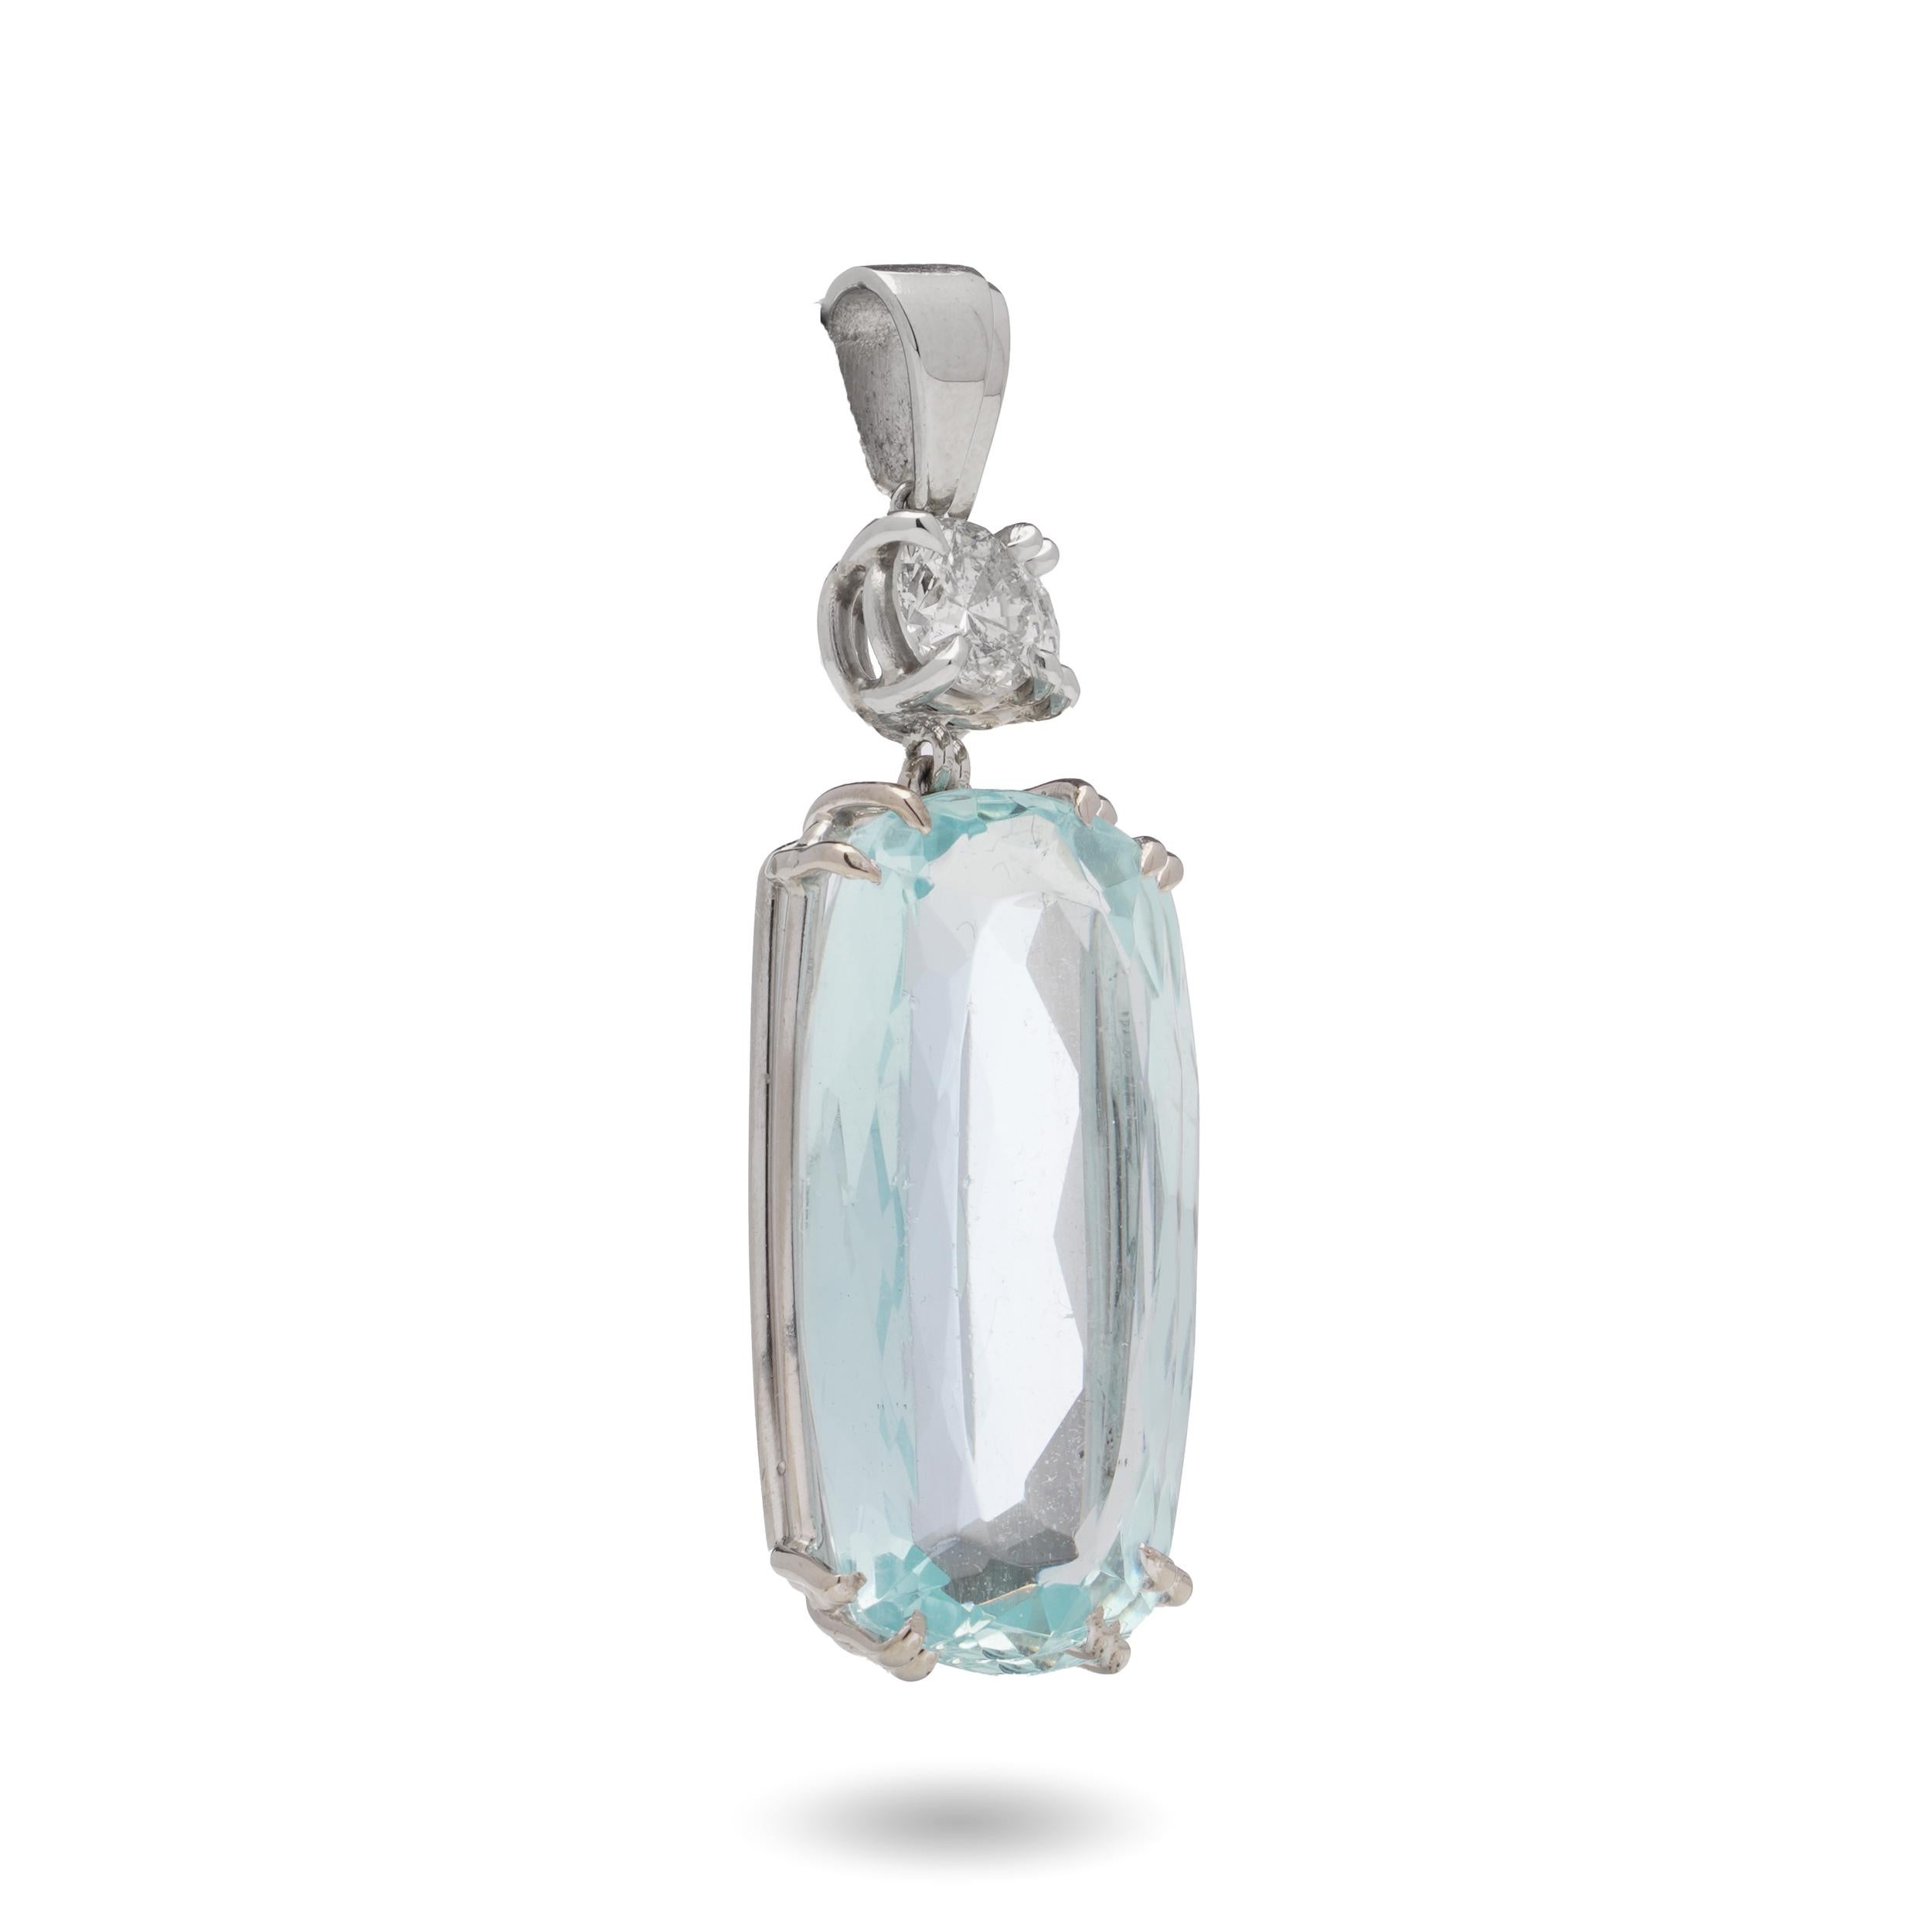 Women's 18kt white gold pendant with 8.68 cts Aquamarine and 0.50 carats of round brilli For Sale